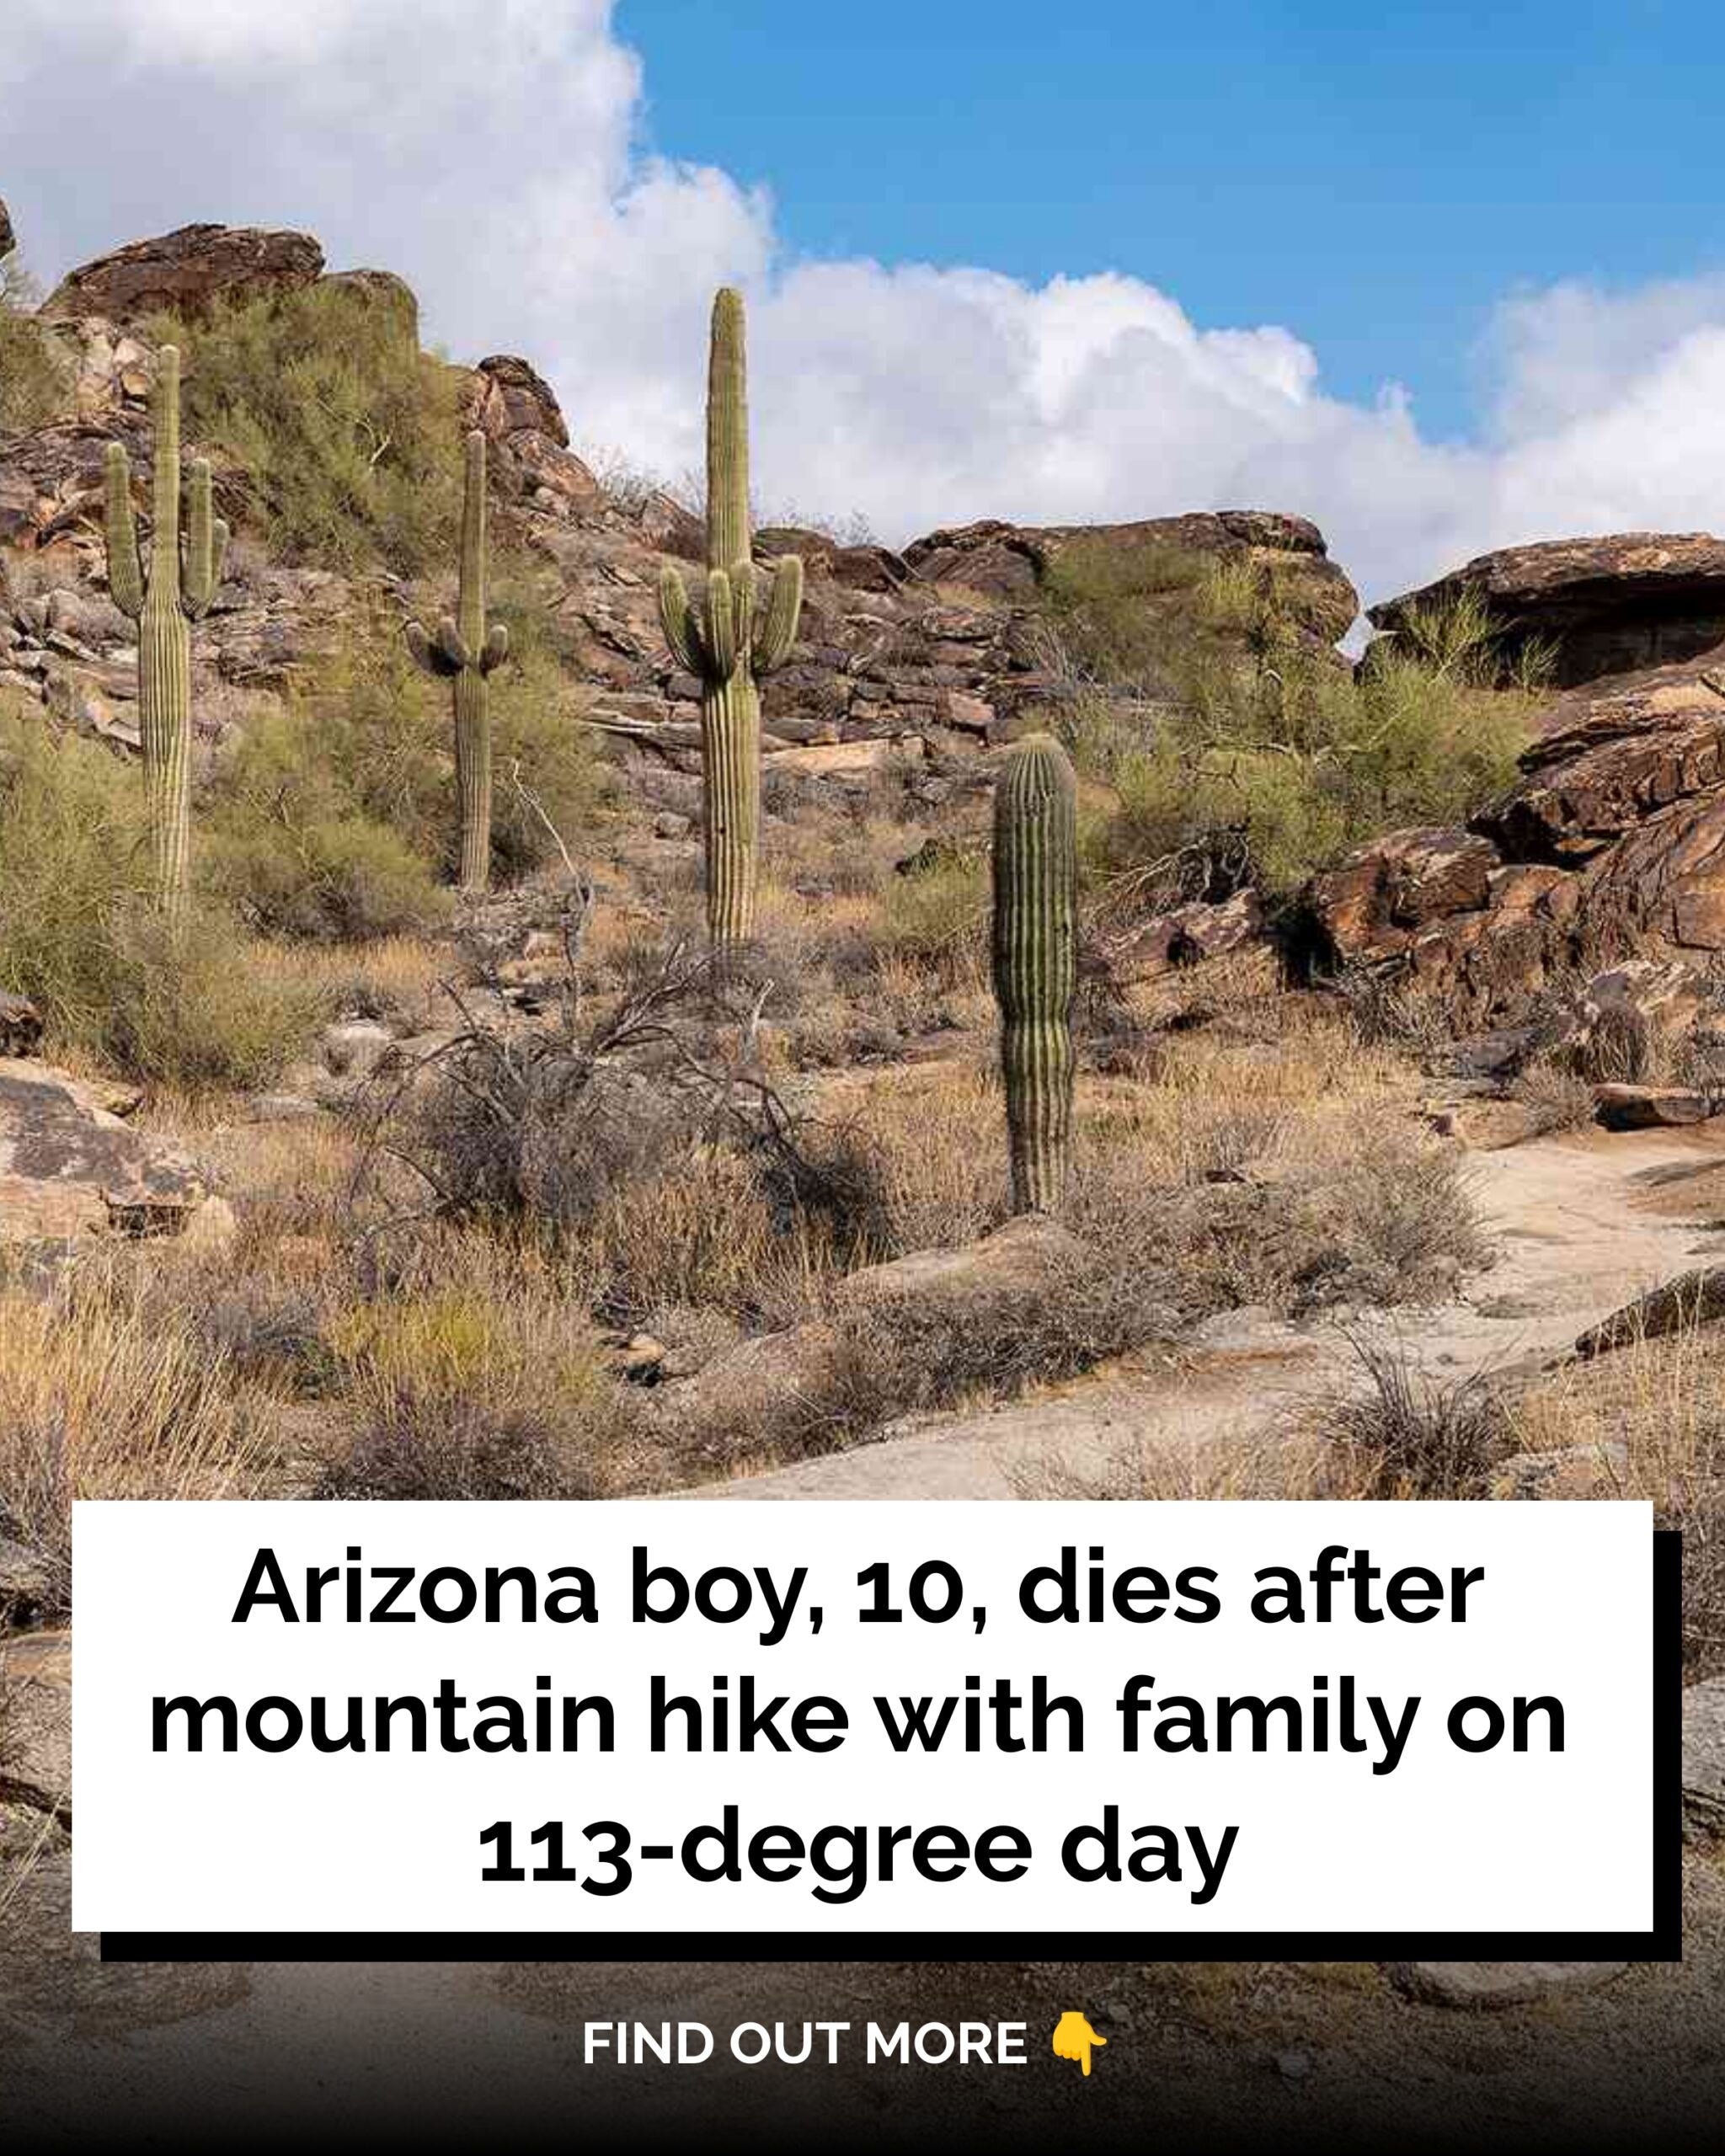 Arizona Boy, 10, Dies After Mountain Hike with Family on 113-Degree Day